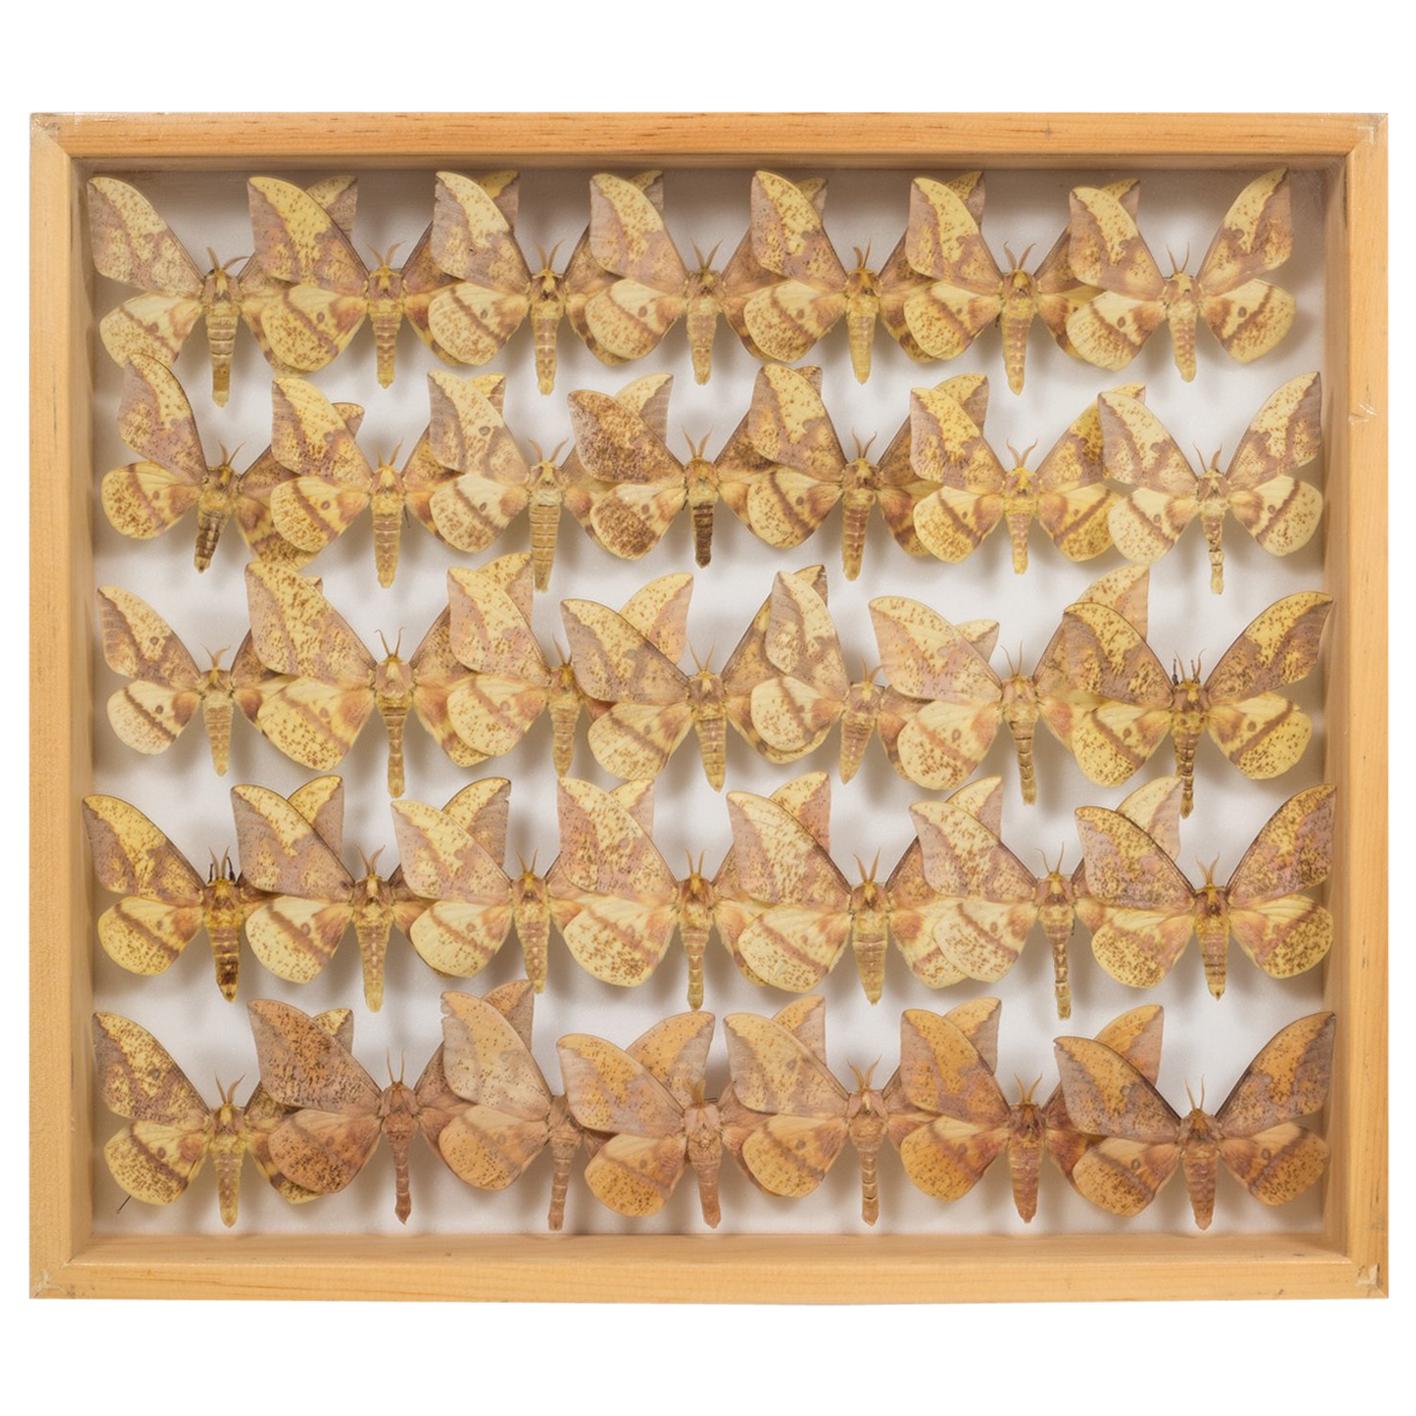 Shadowboxed Collection of Farm Raised Moths in a Maple Case